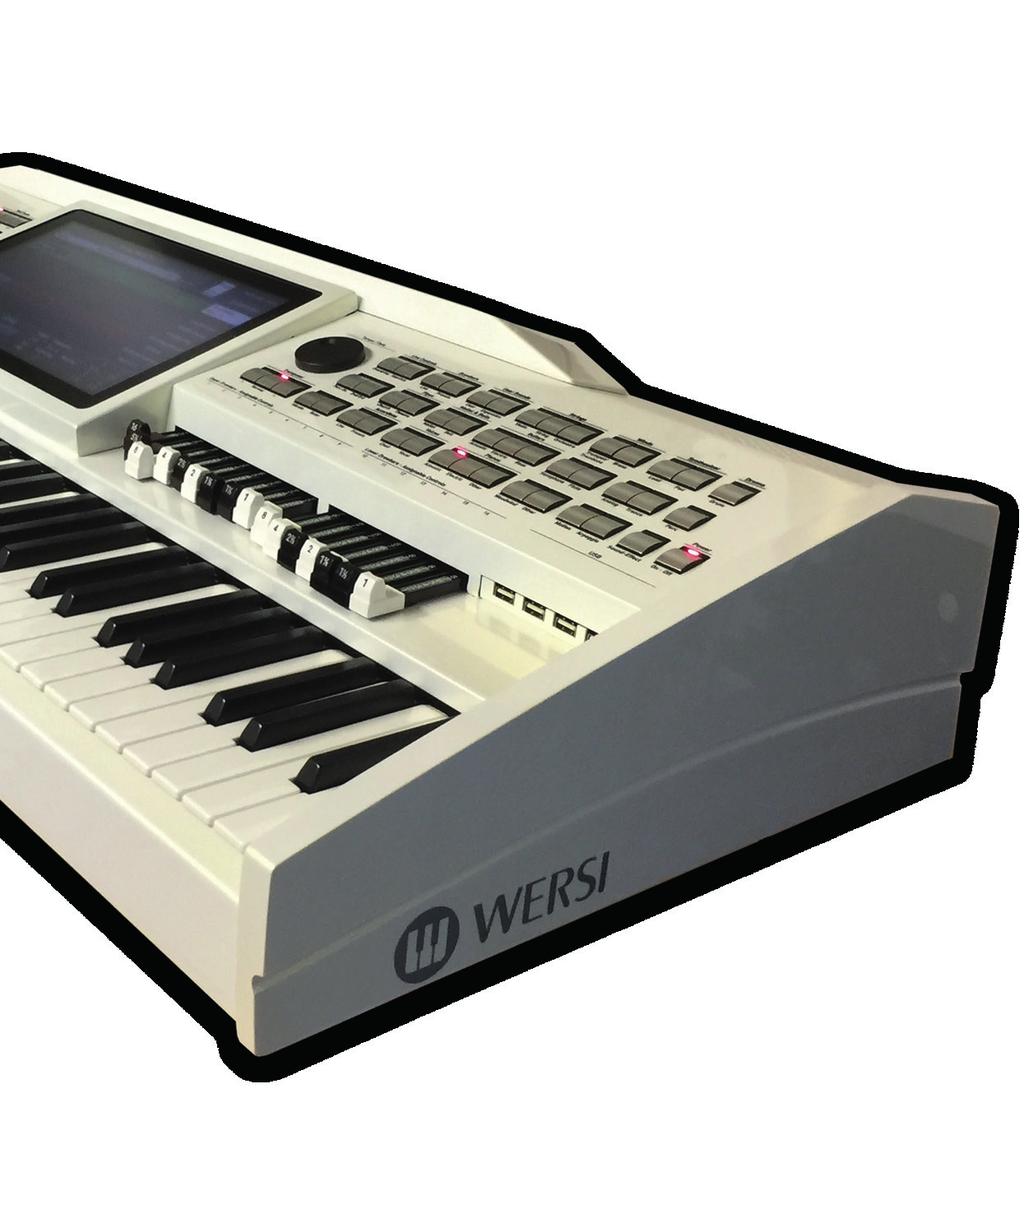 TECHNICAL HIGHLIGHTS OF THE OAX-1 KEYBOARD 76 NOTE KEYBOARD UPTO 16 SOUNDS PEARL WHITE / METALLIC BLACK